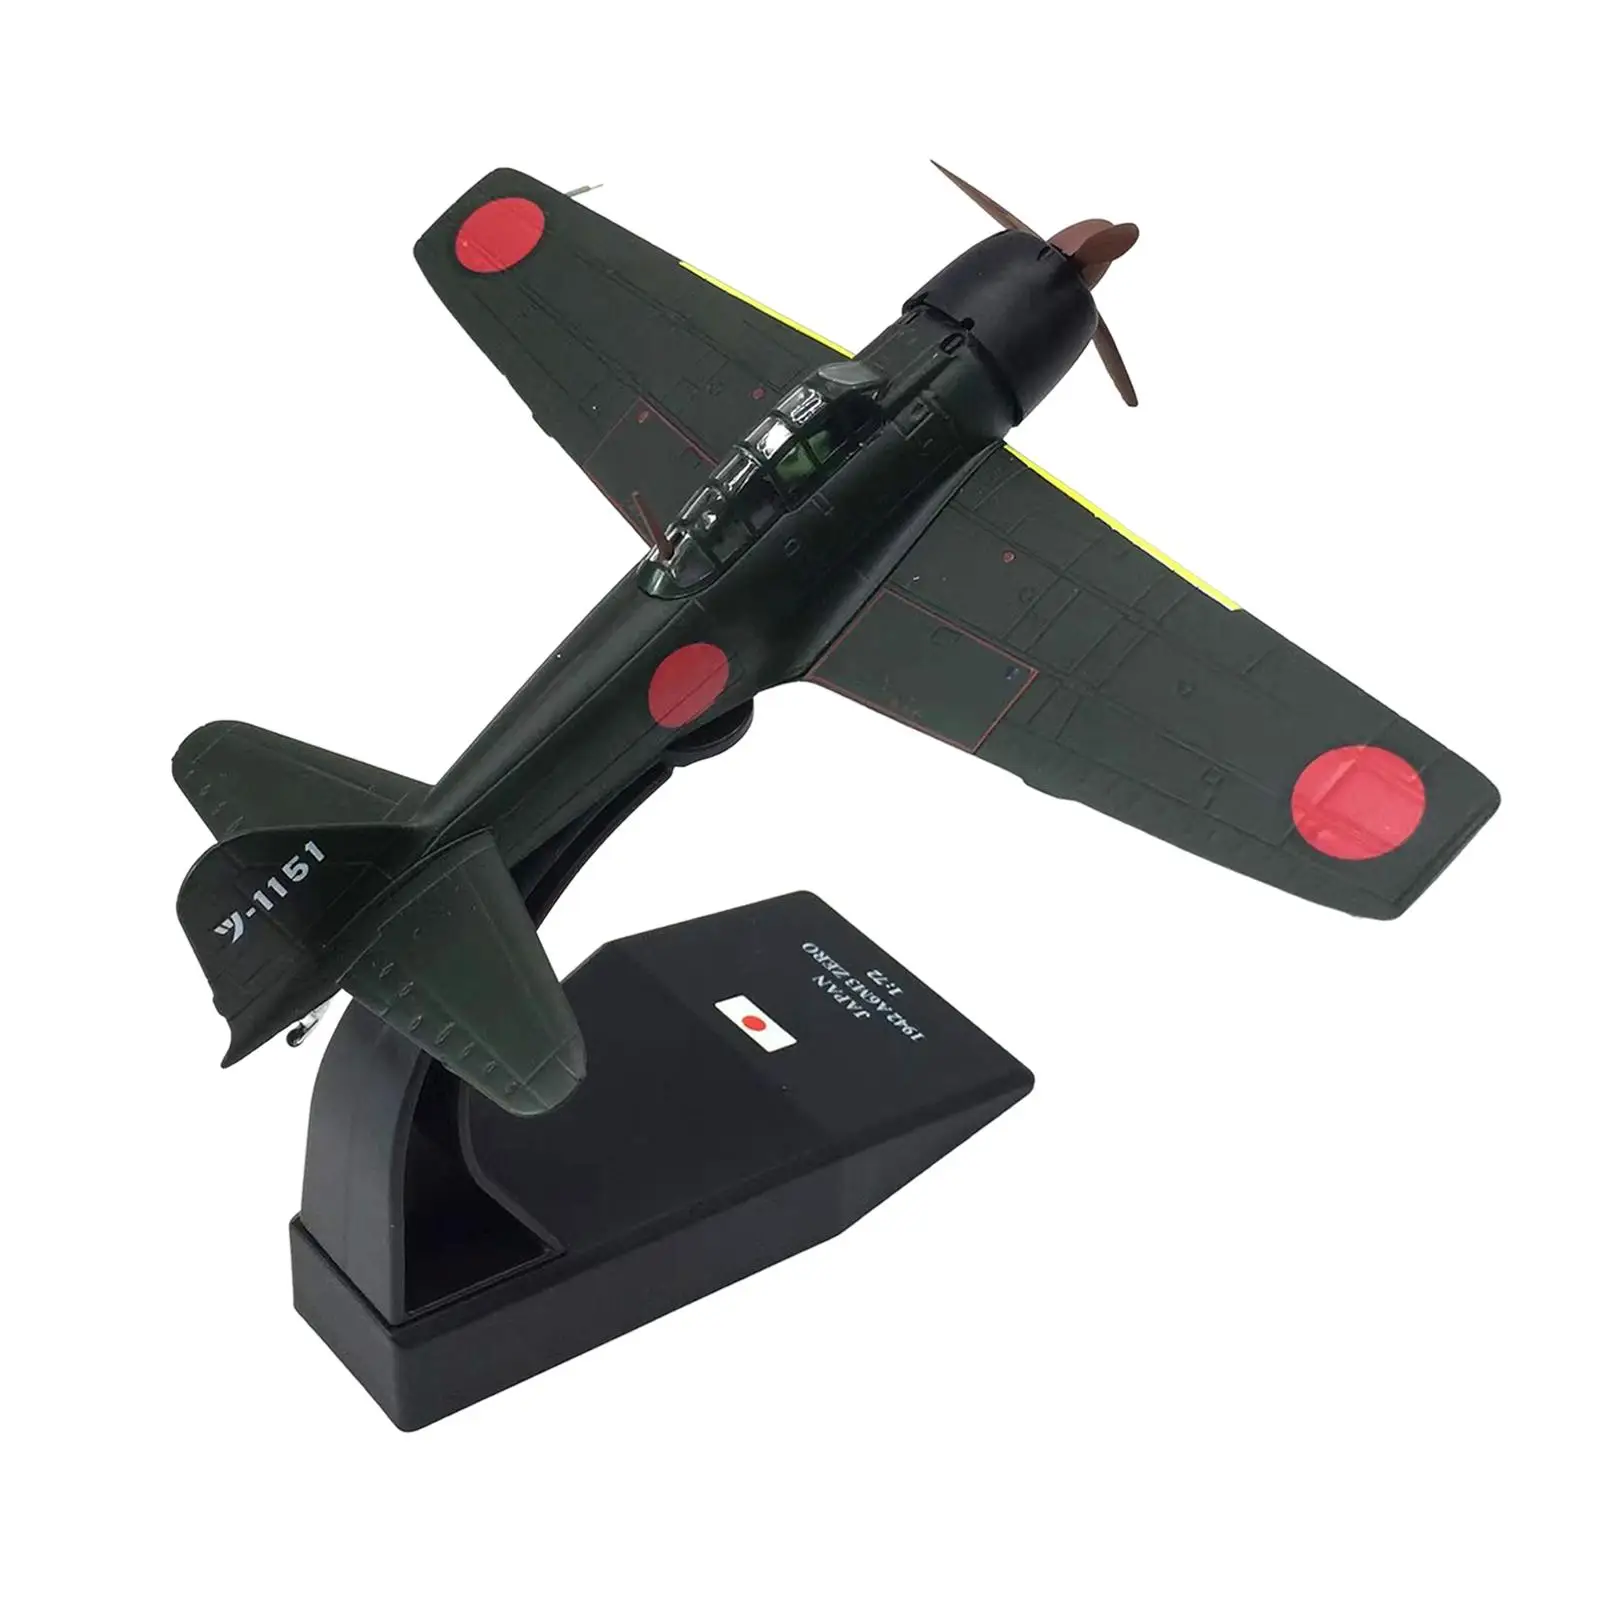 1/72 Scale Aircraft Decoration Metal Toy Collectibles Fighter for Adult Kids